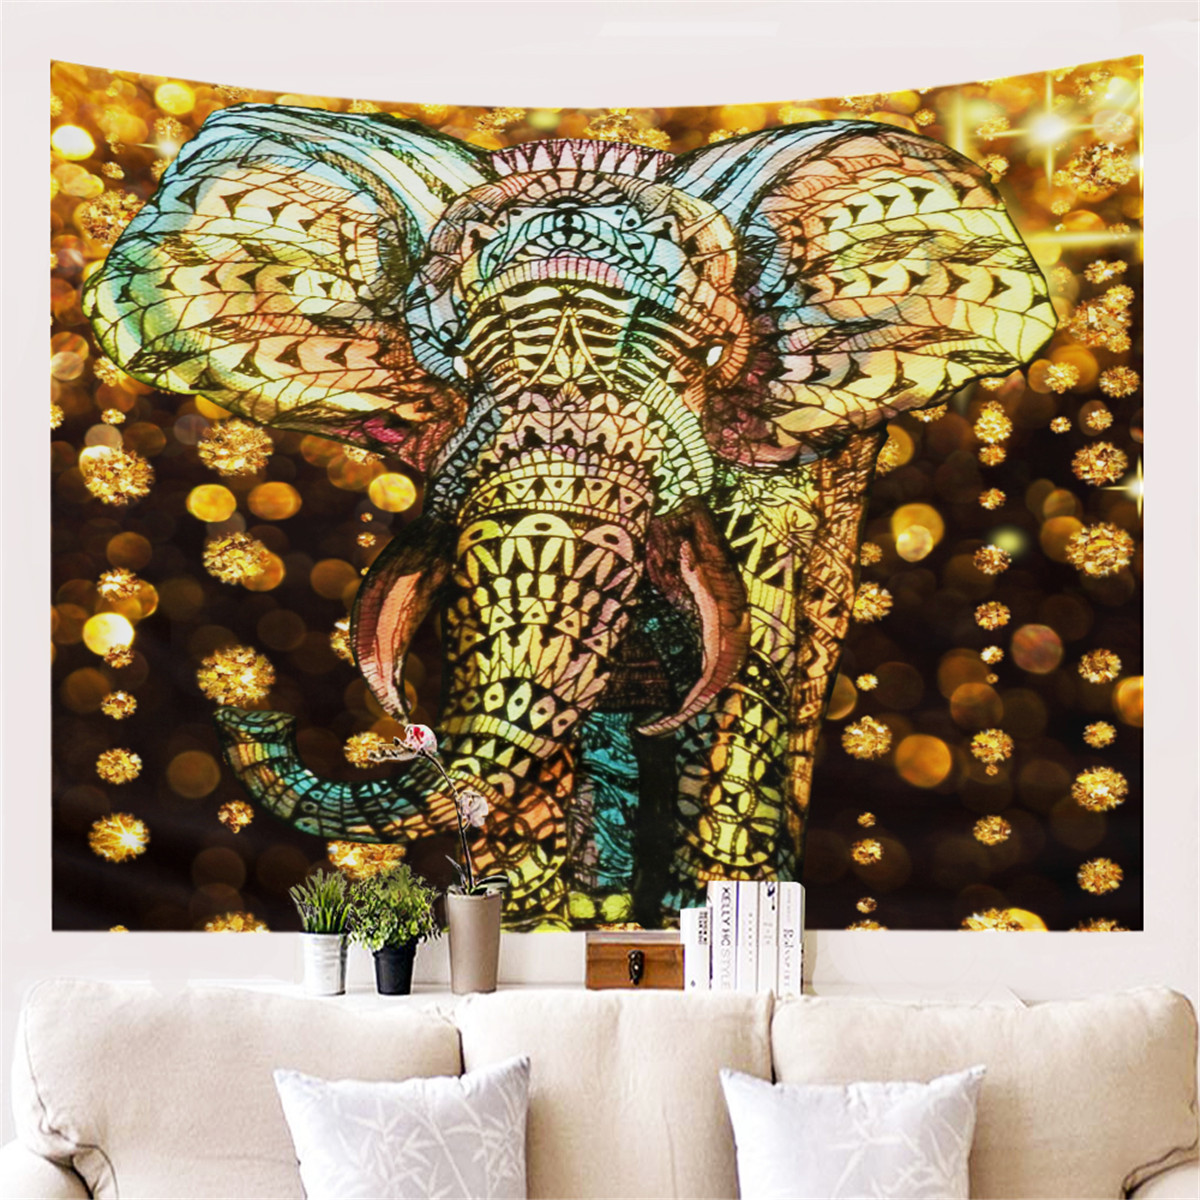 Colorful-Dye-Elephant-Tapestry-Wall-Hanging-Hippie-Tapestry-Colored-Printed-Decorative-Indian-Tapest-1751738-8